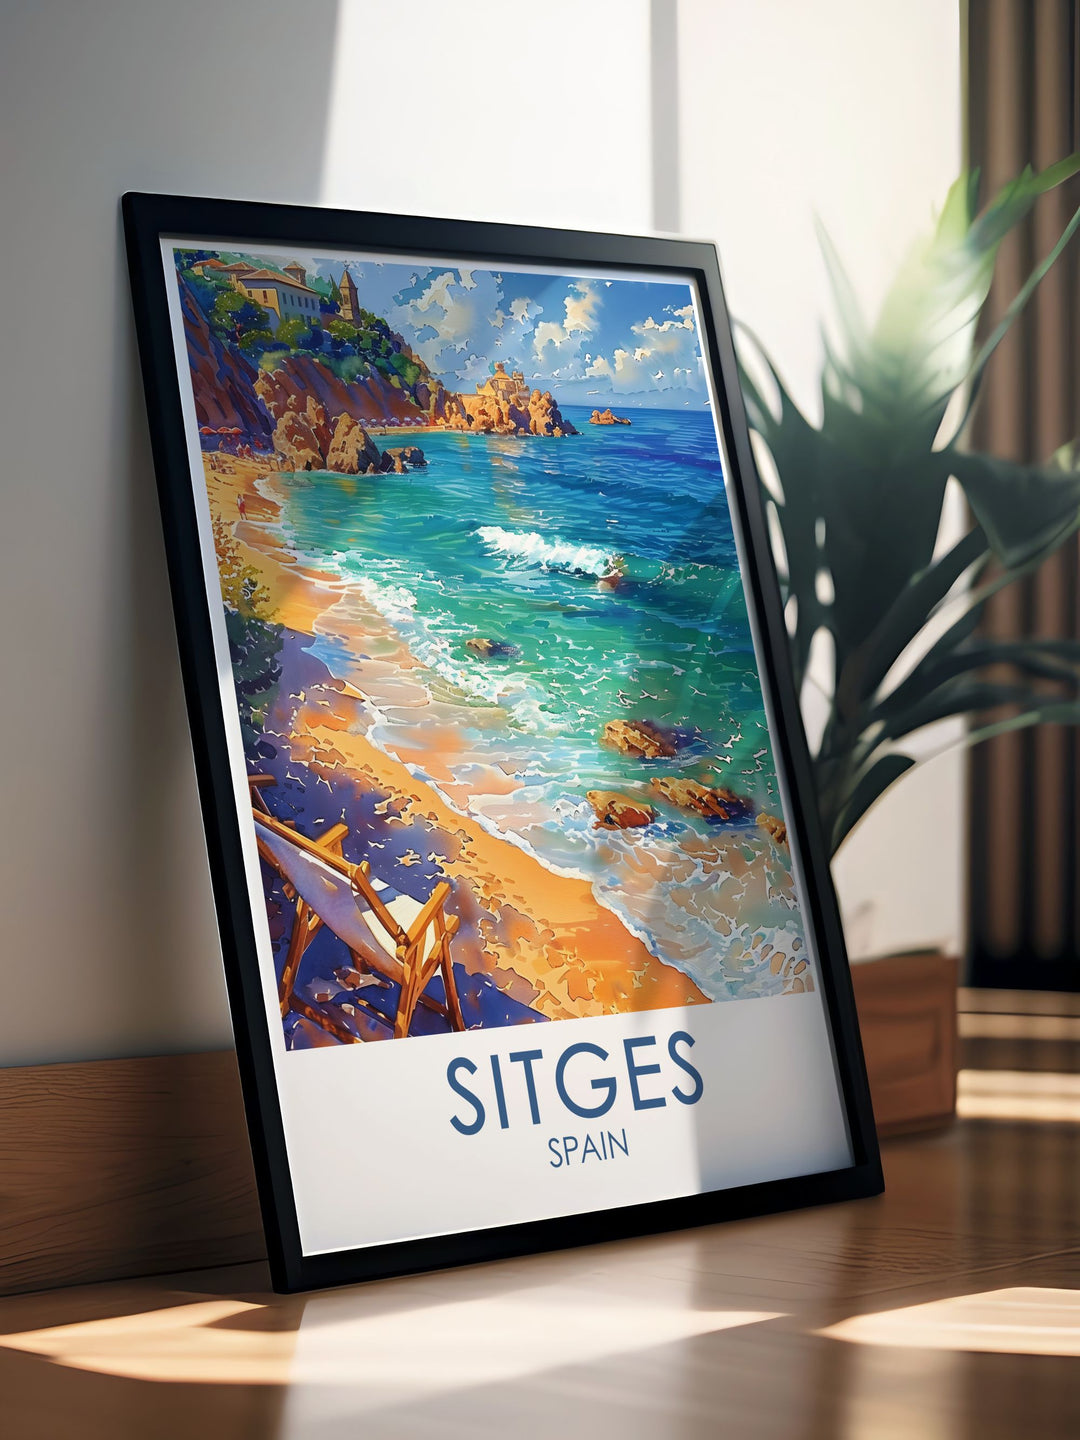 The beautiful beaches of Sitges are showcased in this poster, capturing the serene beauty and inviting atmosphere of this Mediterranean paradise, perfect for beach lovers and sunseekers.